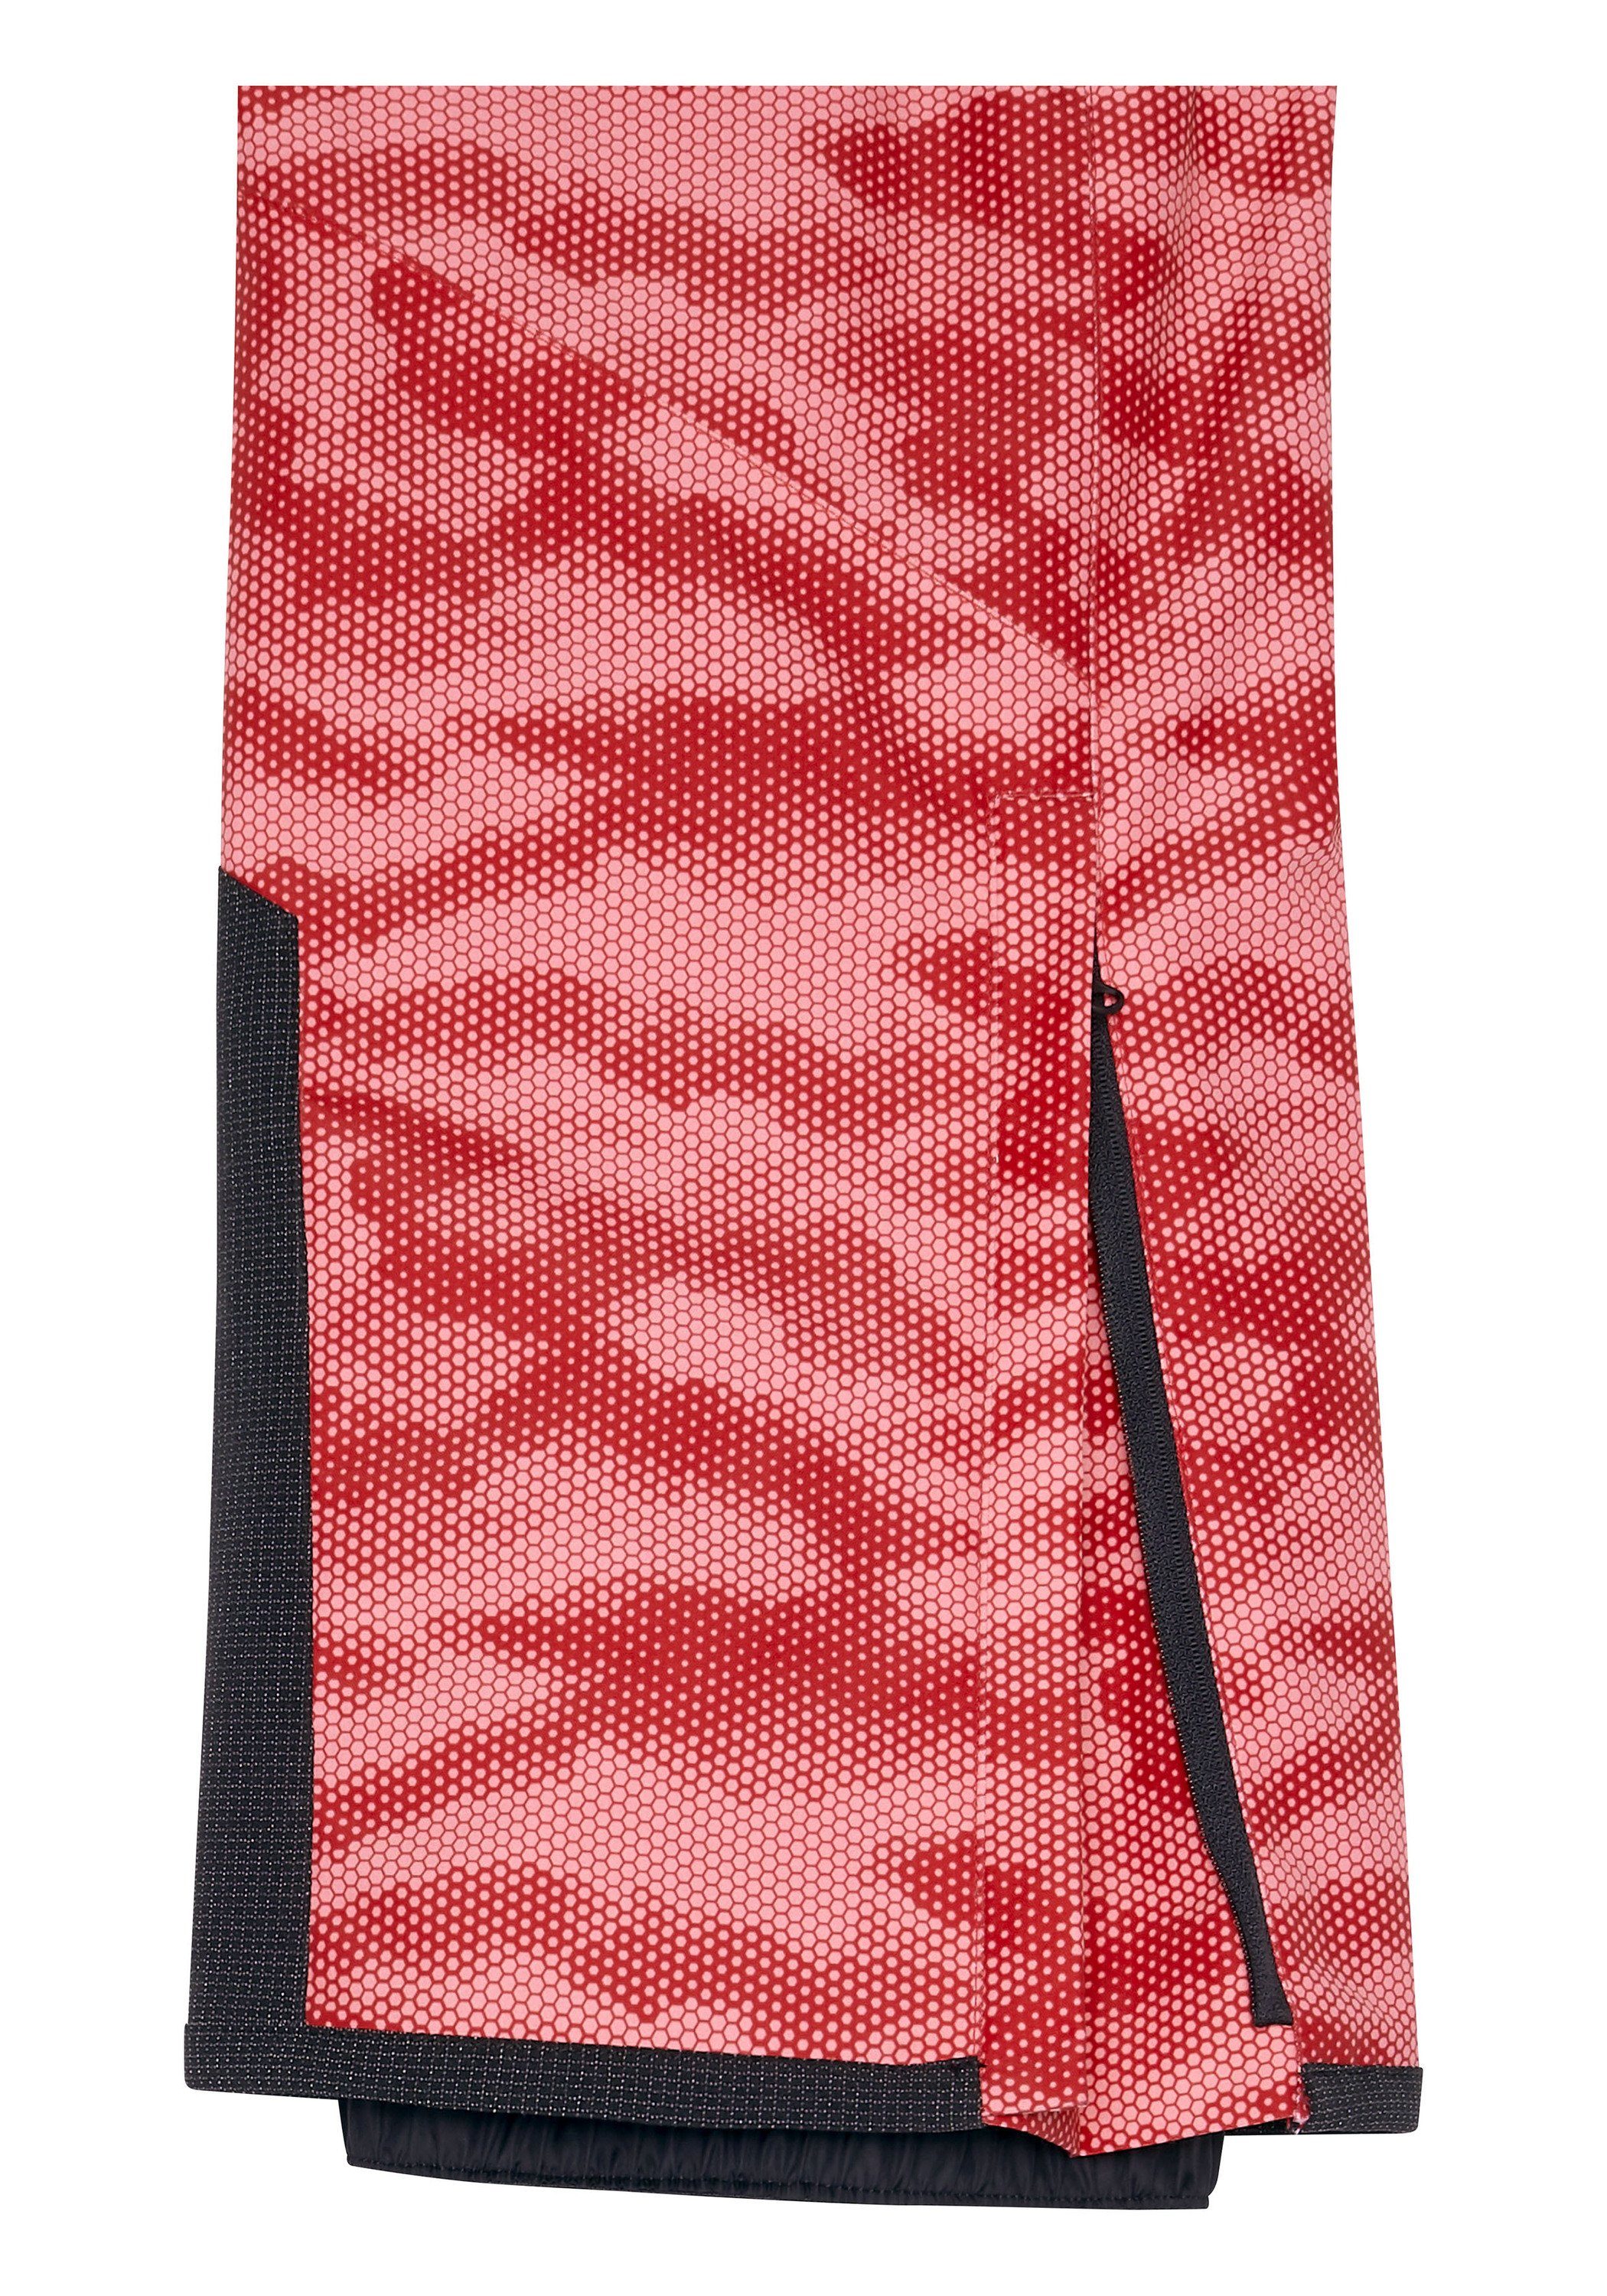 Sporthose Slim-Fit rosa/rosa Skihose mit hell 1 Chiemsee Allover-Muster